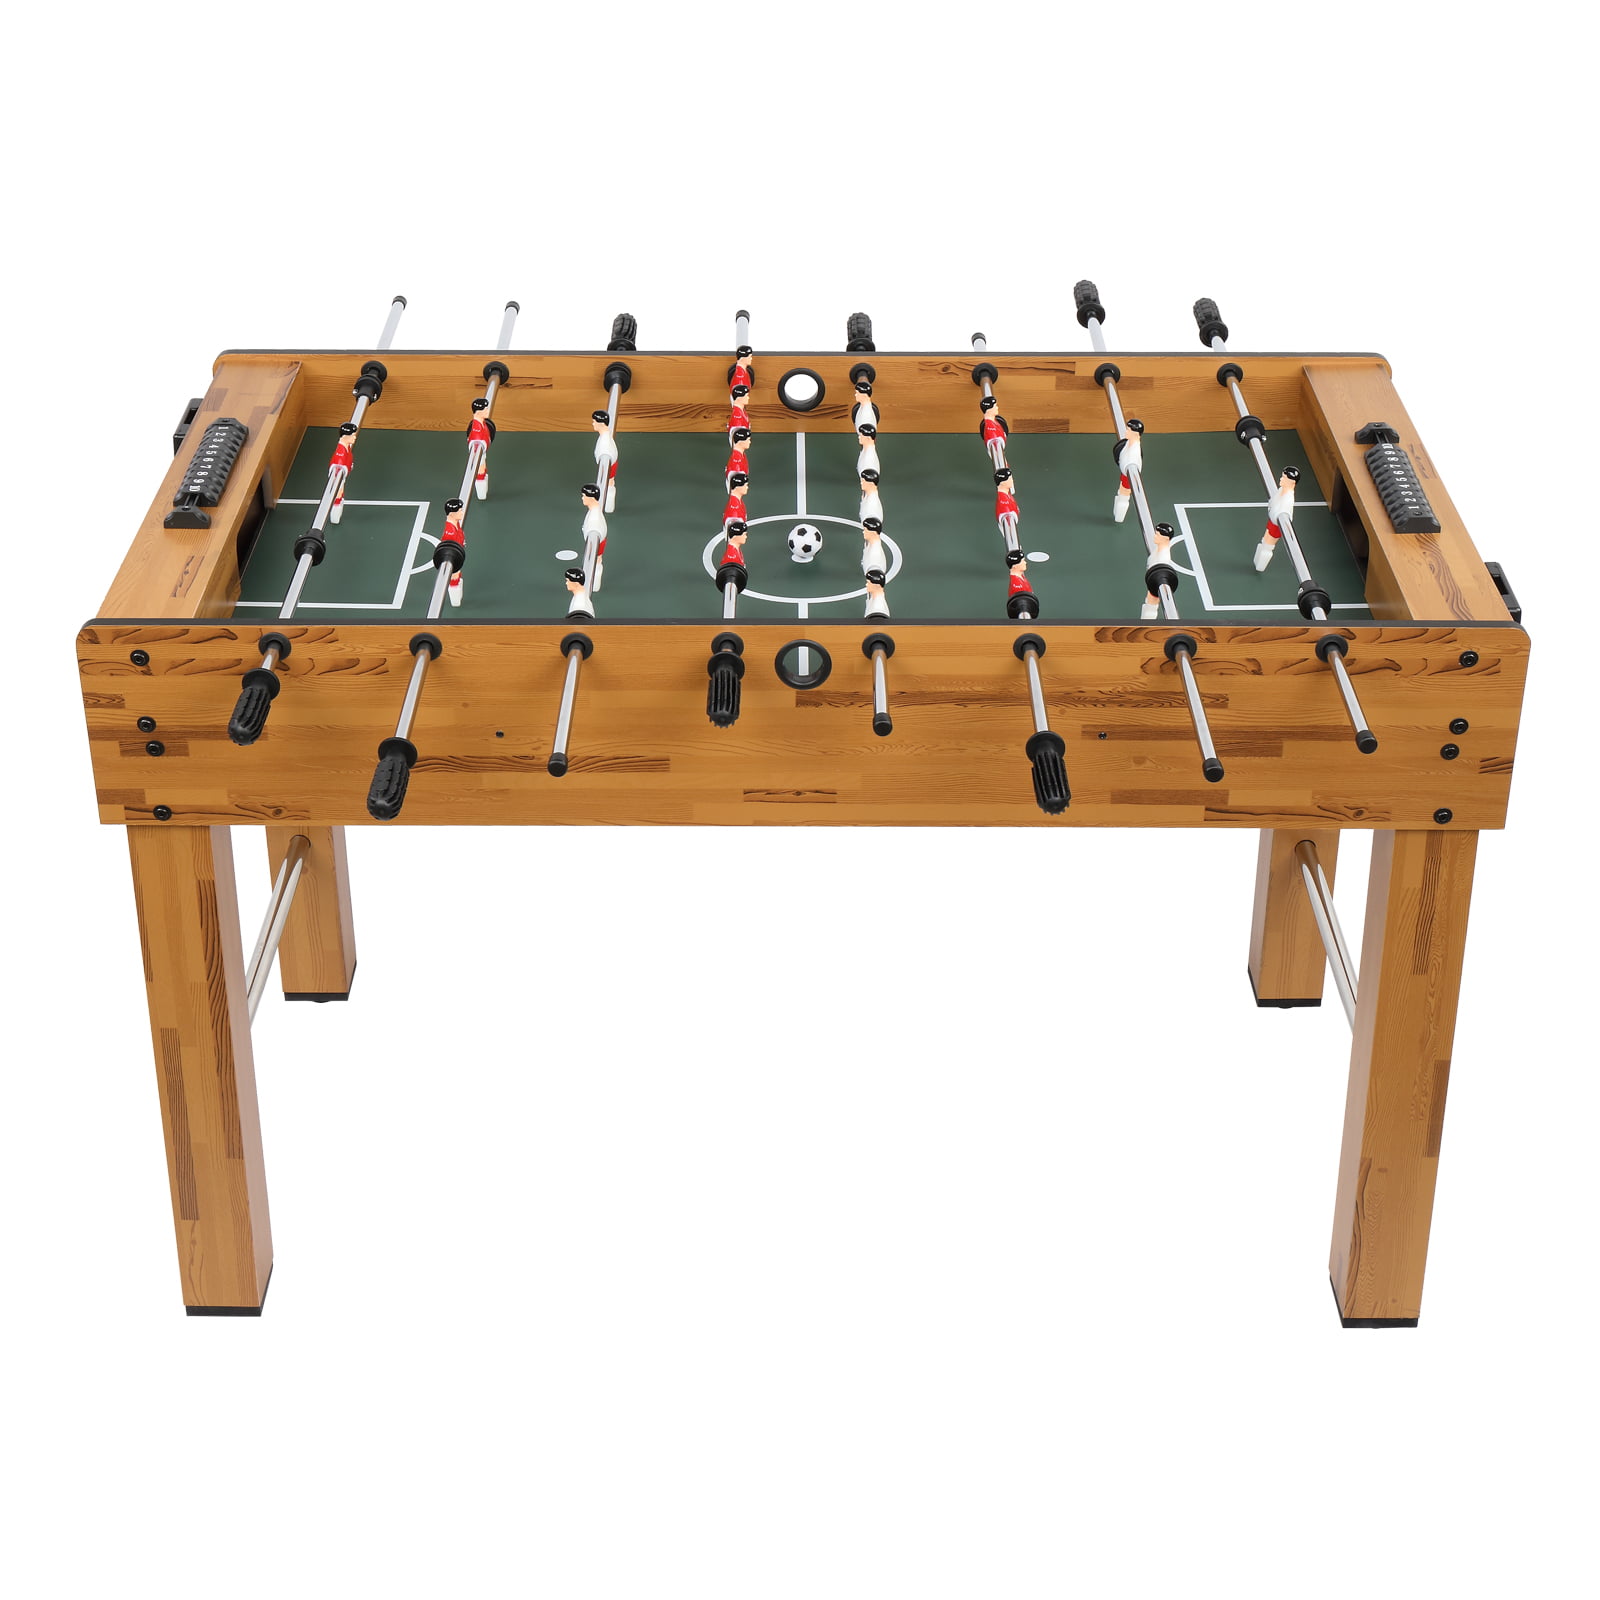 Arcade Competition Sized Football Table for Adult Kids Youth Indoor Home Game Room 2 Cup Holders Goplus 48'' Foosball Table Wooden Soccer Games Table w/ 2 Footballs 